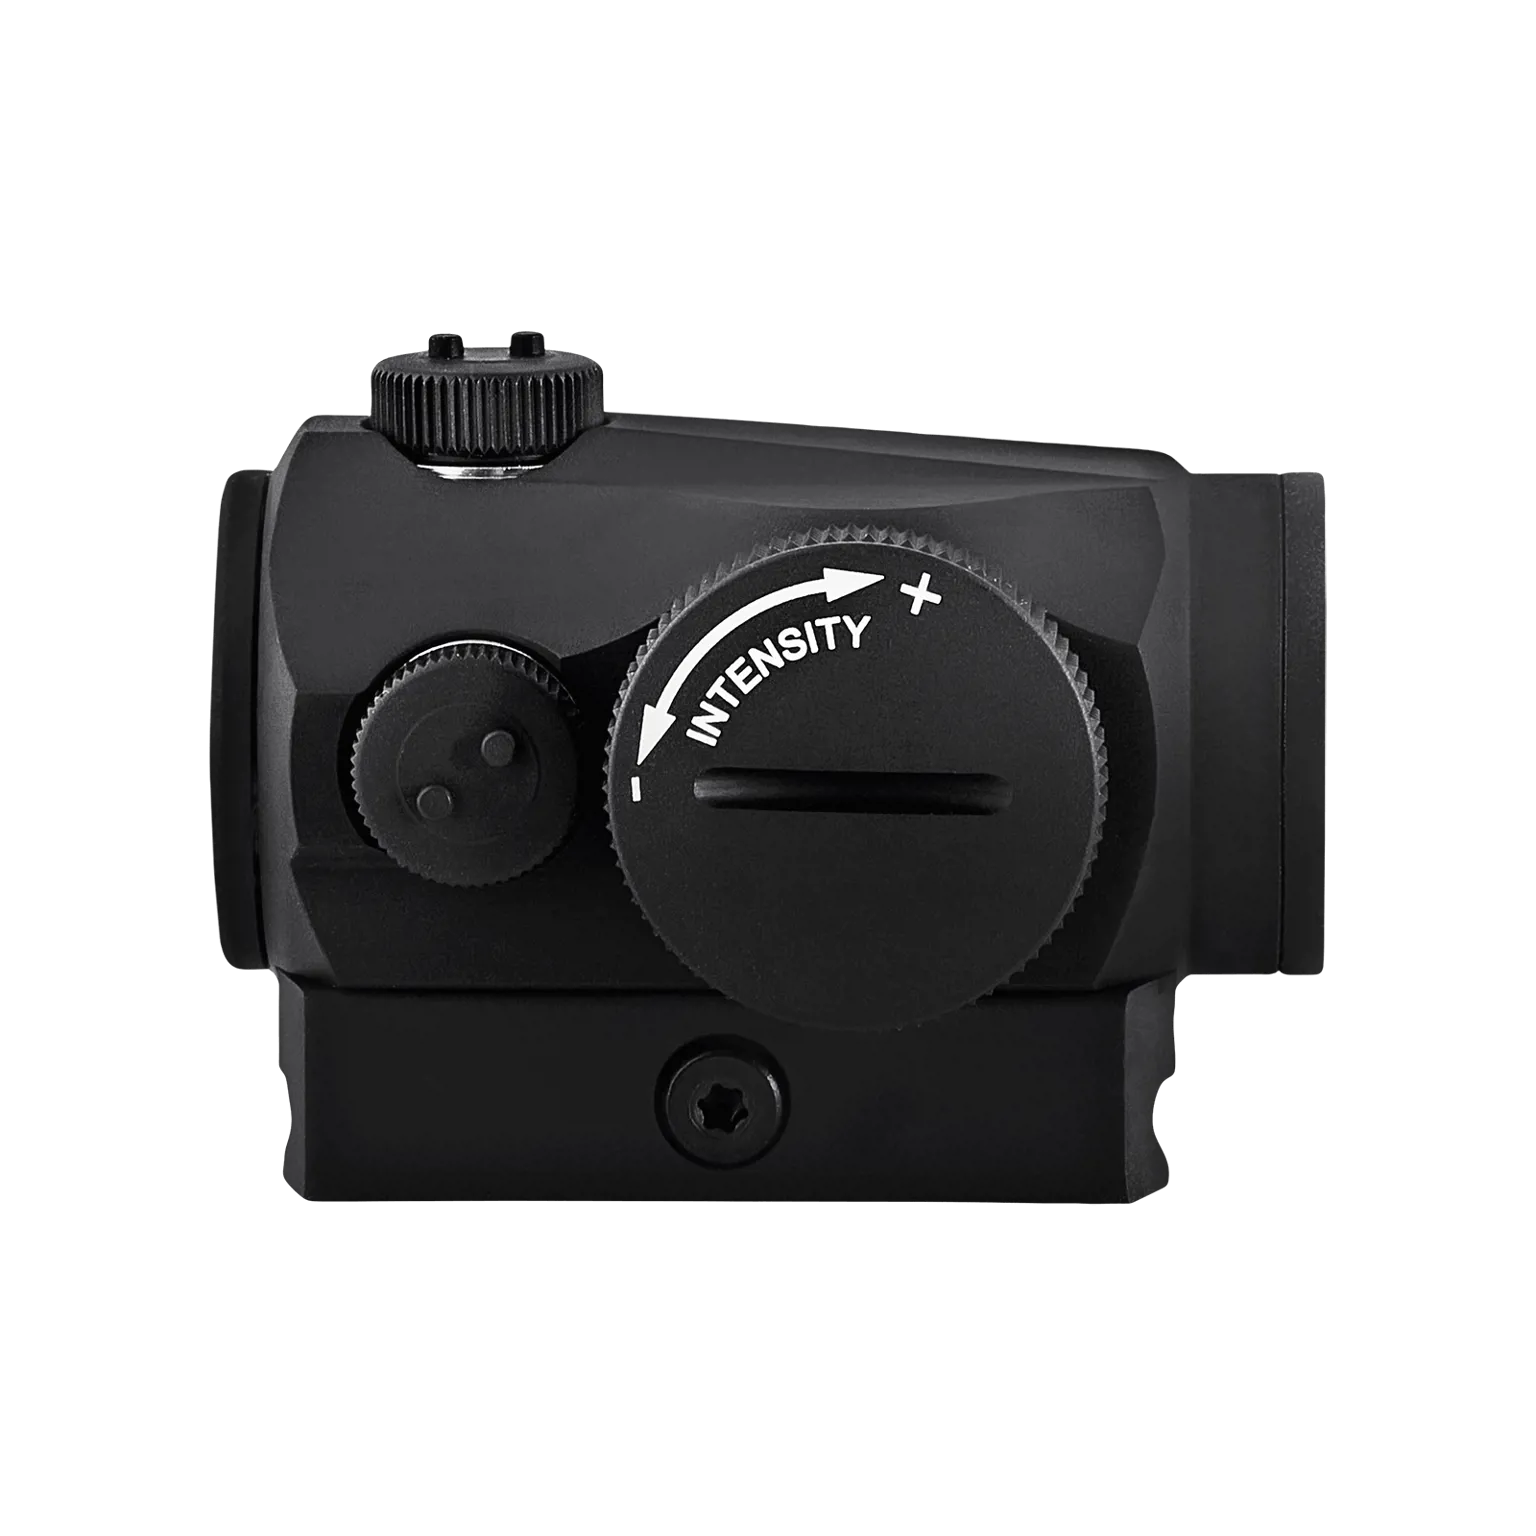 Micro T-1™ 2 MOA - Red dot reflex sight with standard mount for 